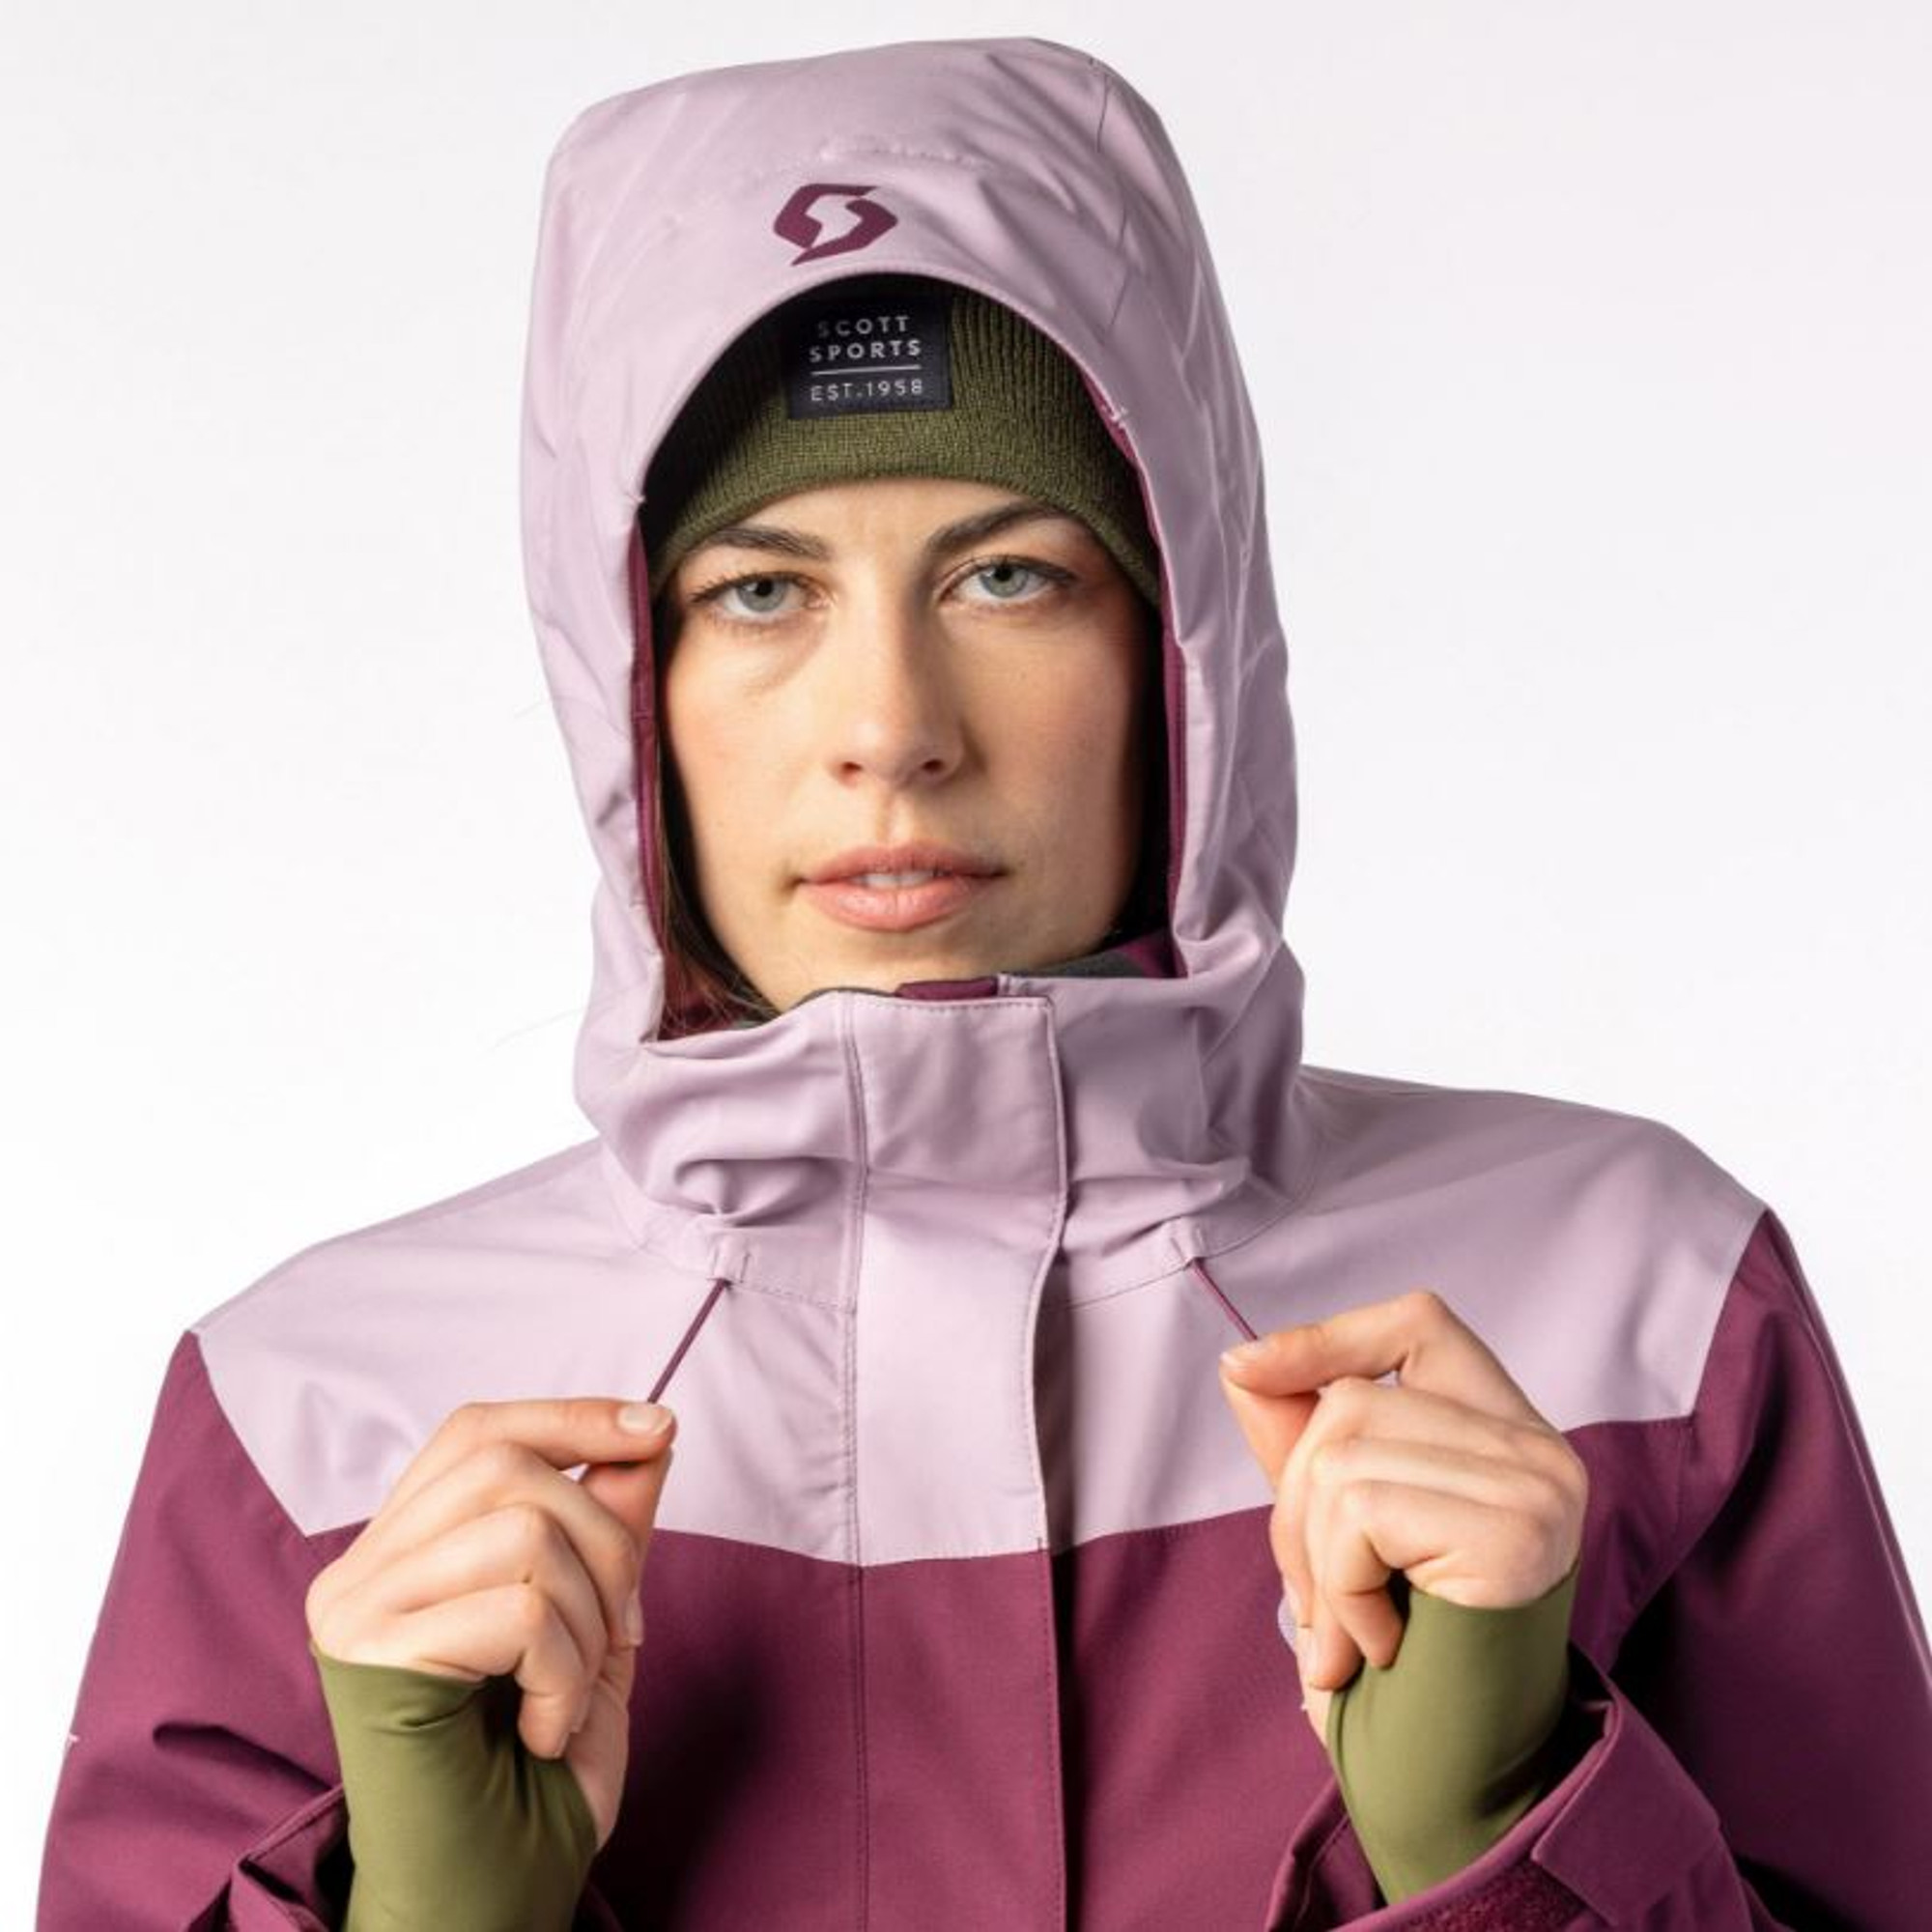 Review: Montane Women's Atomic Jacket - Cool of the Wild